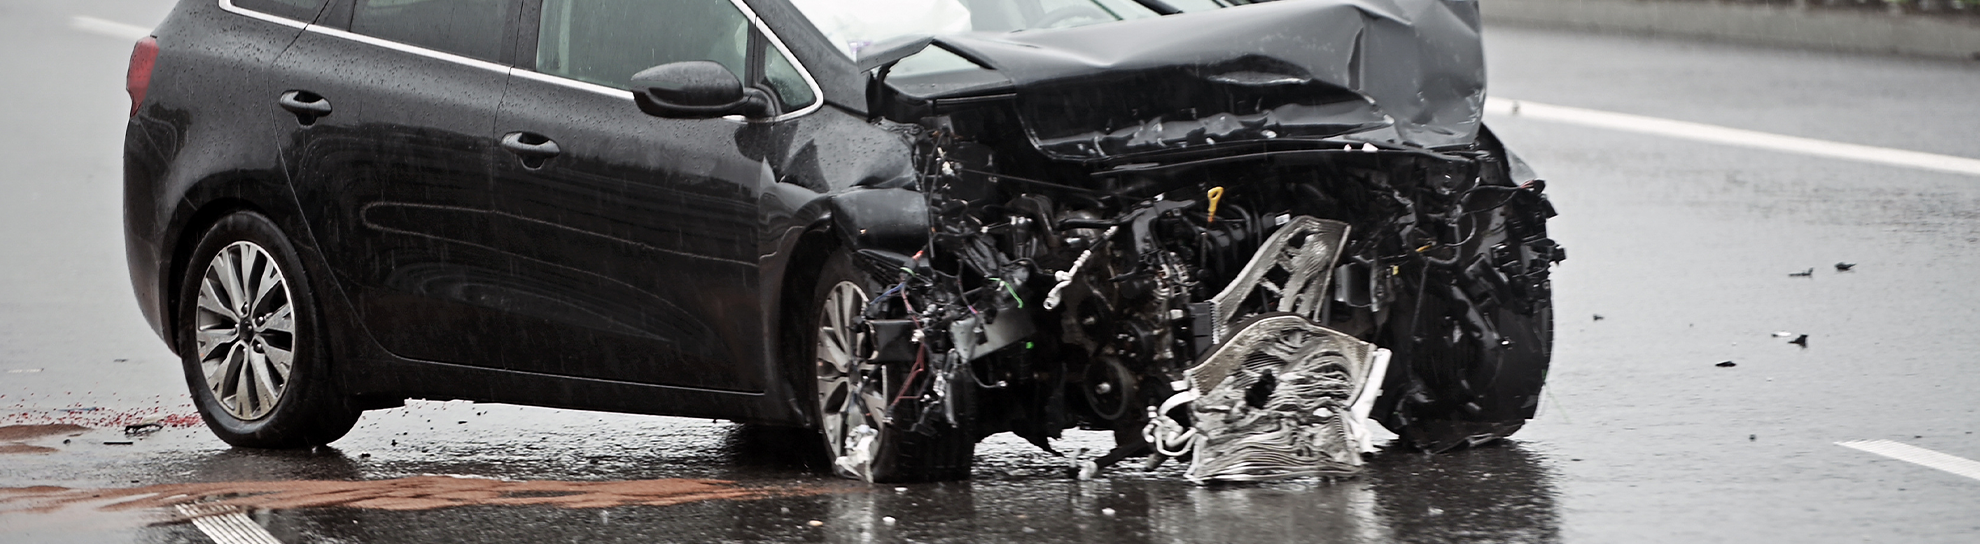 Badly Damaged Front of a Car on a Highway Right After Head On Barrier Collision in Heavy Rain